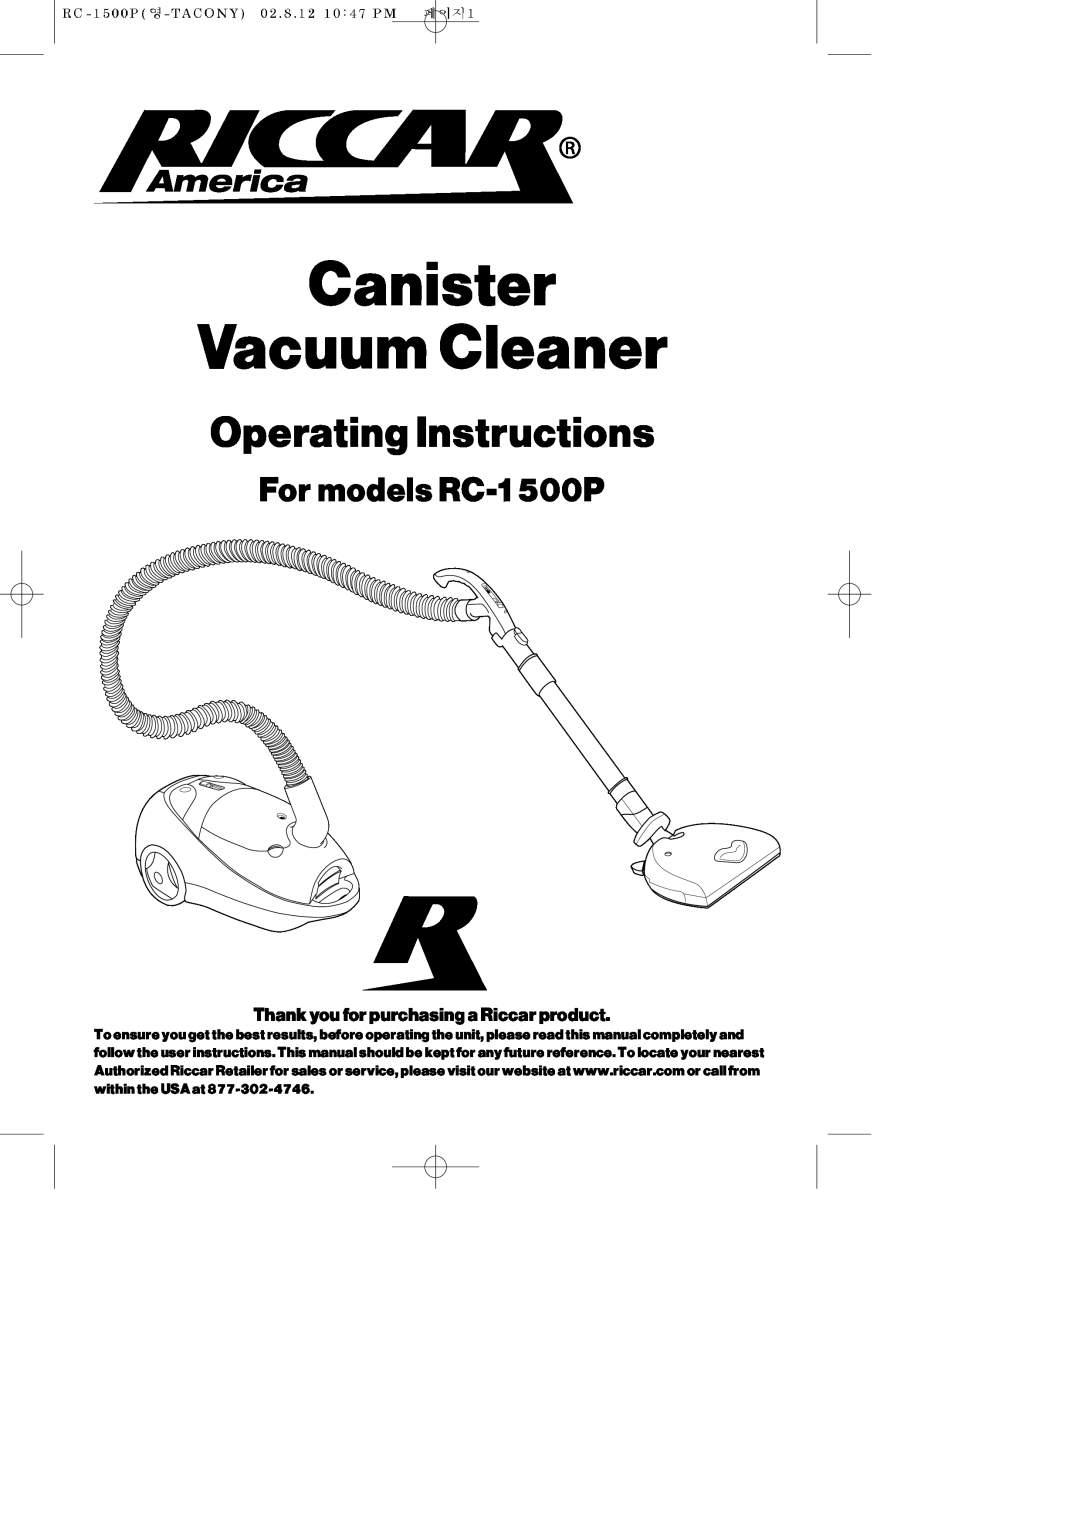 Riccar manual Canister Vacuum Cleaner, Operating Instructions, For models RC-1500P 